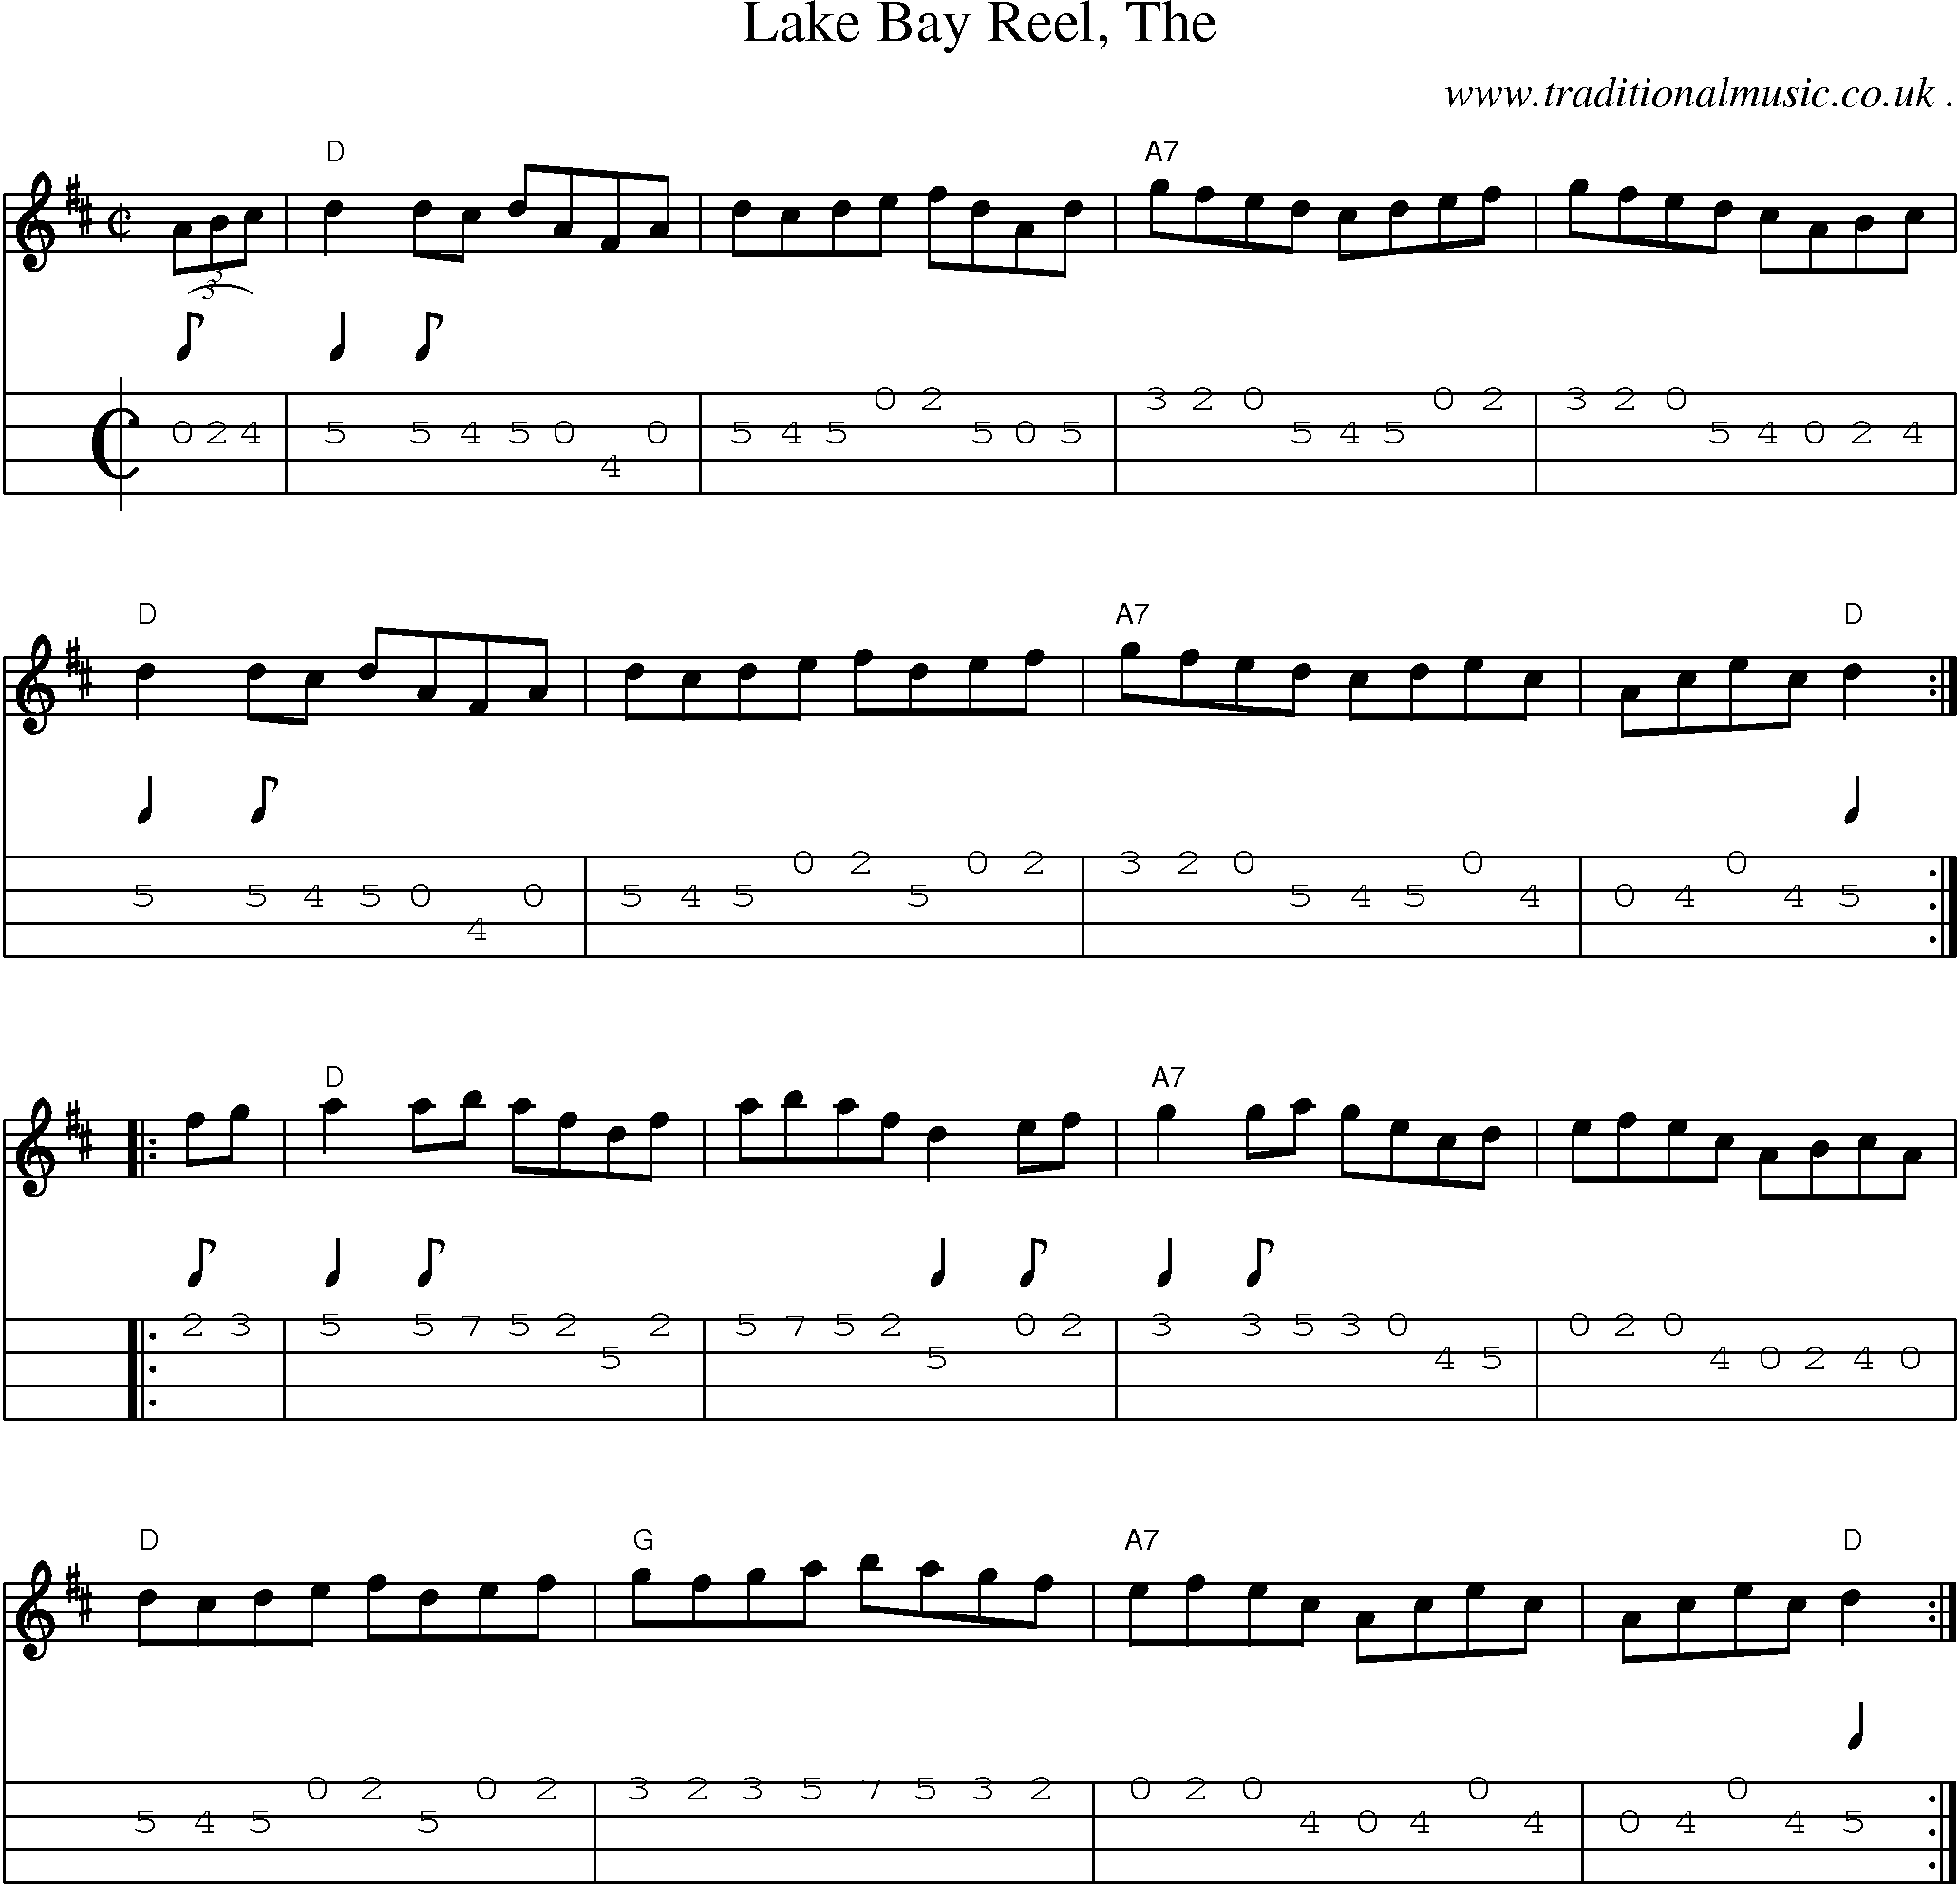 Music Score and Guitar Tabs for Lake Bay Reel The